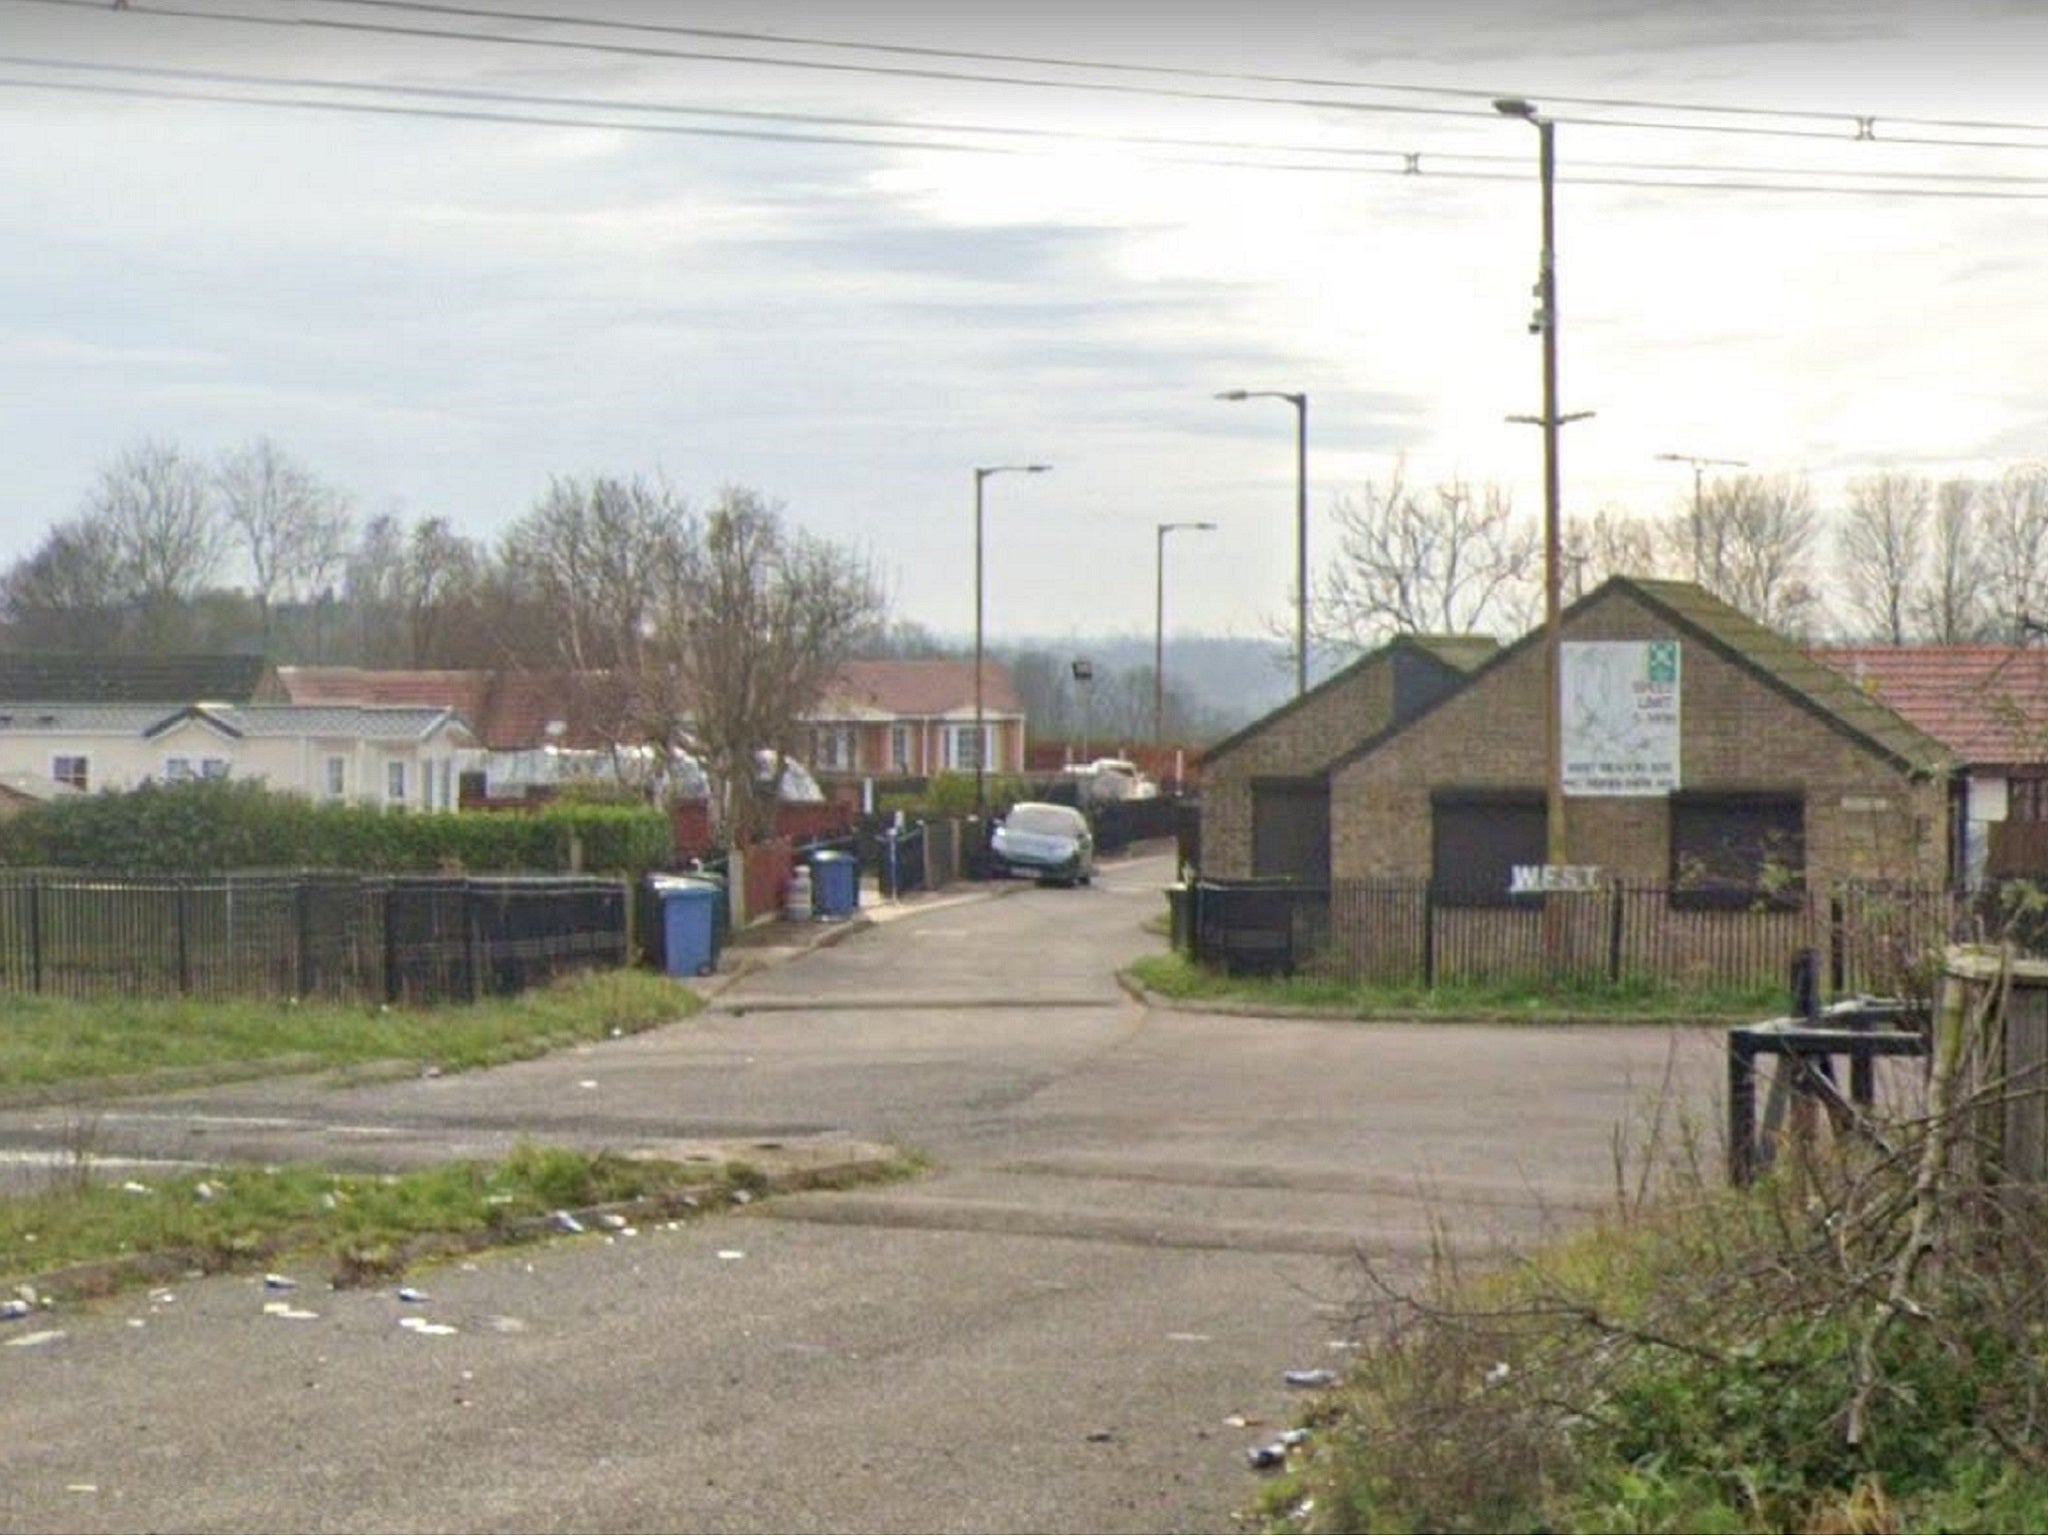 Google street view image of the West Meadows site in Ipswich, Suffolk